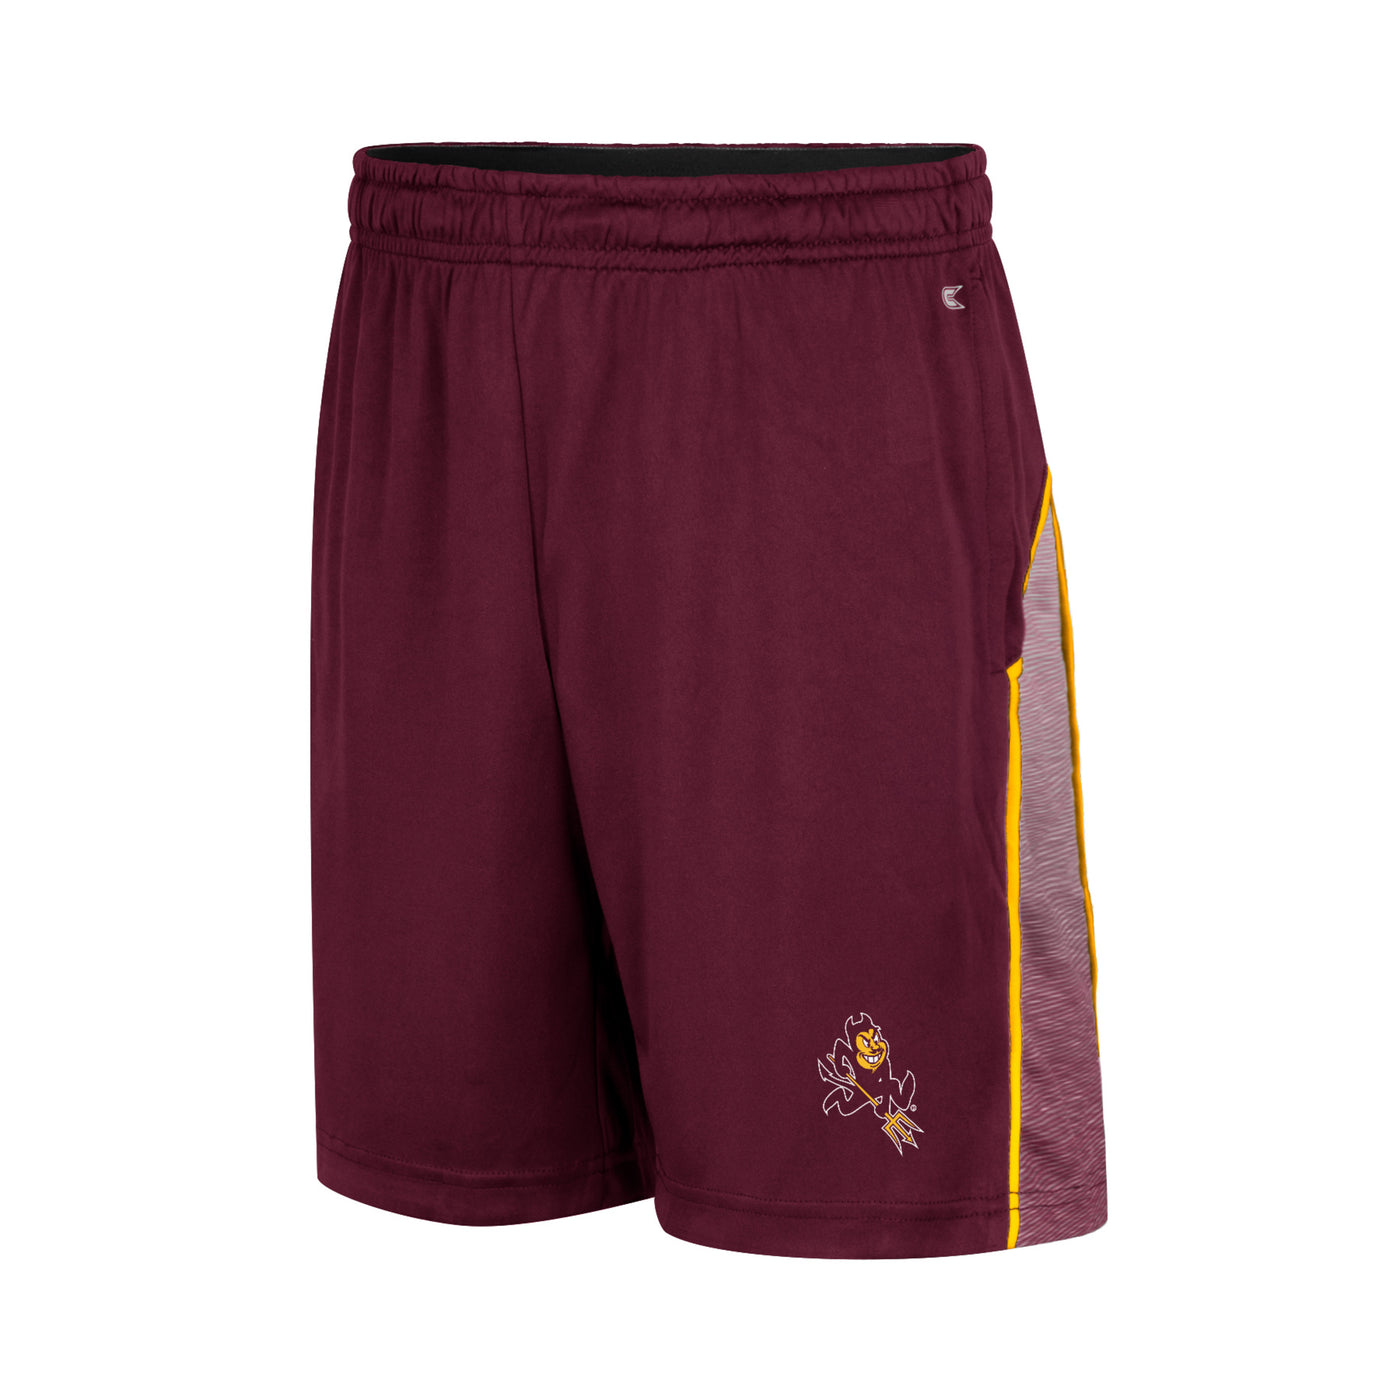 ASU youth maroon shorts with light maroon on the side panels and gold outline and Sparky on the bottom of the left leg